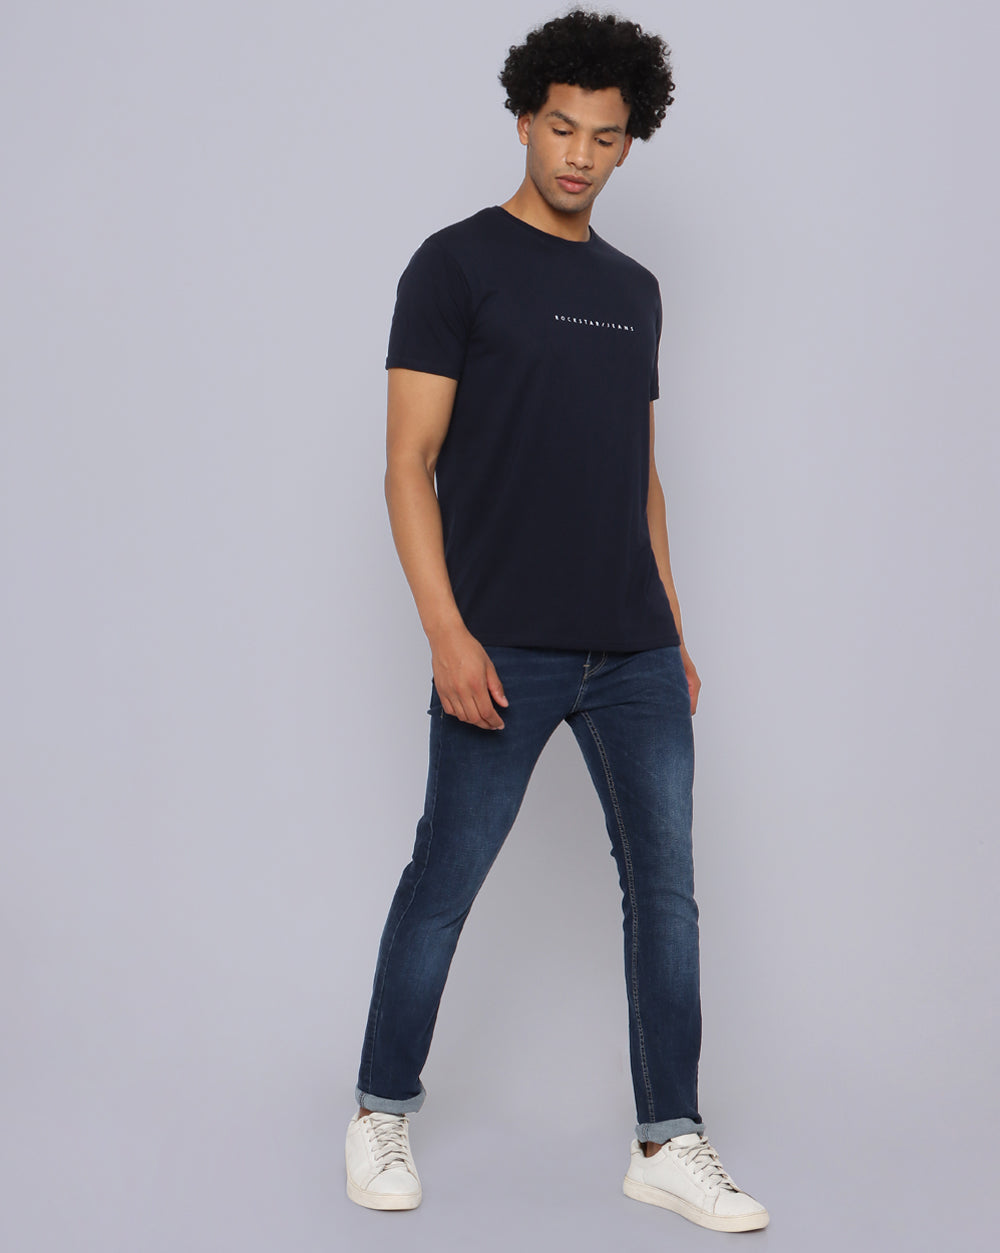 Buy Stylish Shirts for Men Online - Pepe Jeans India